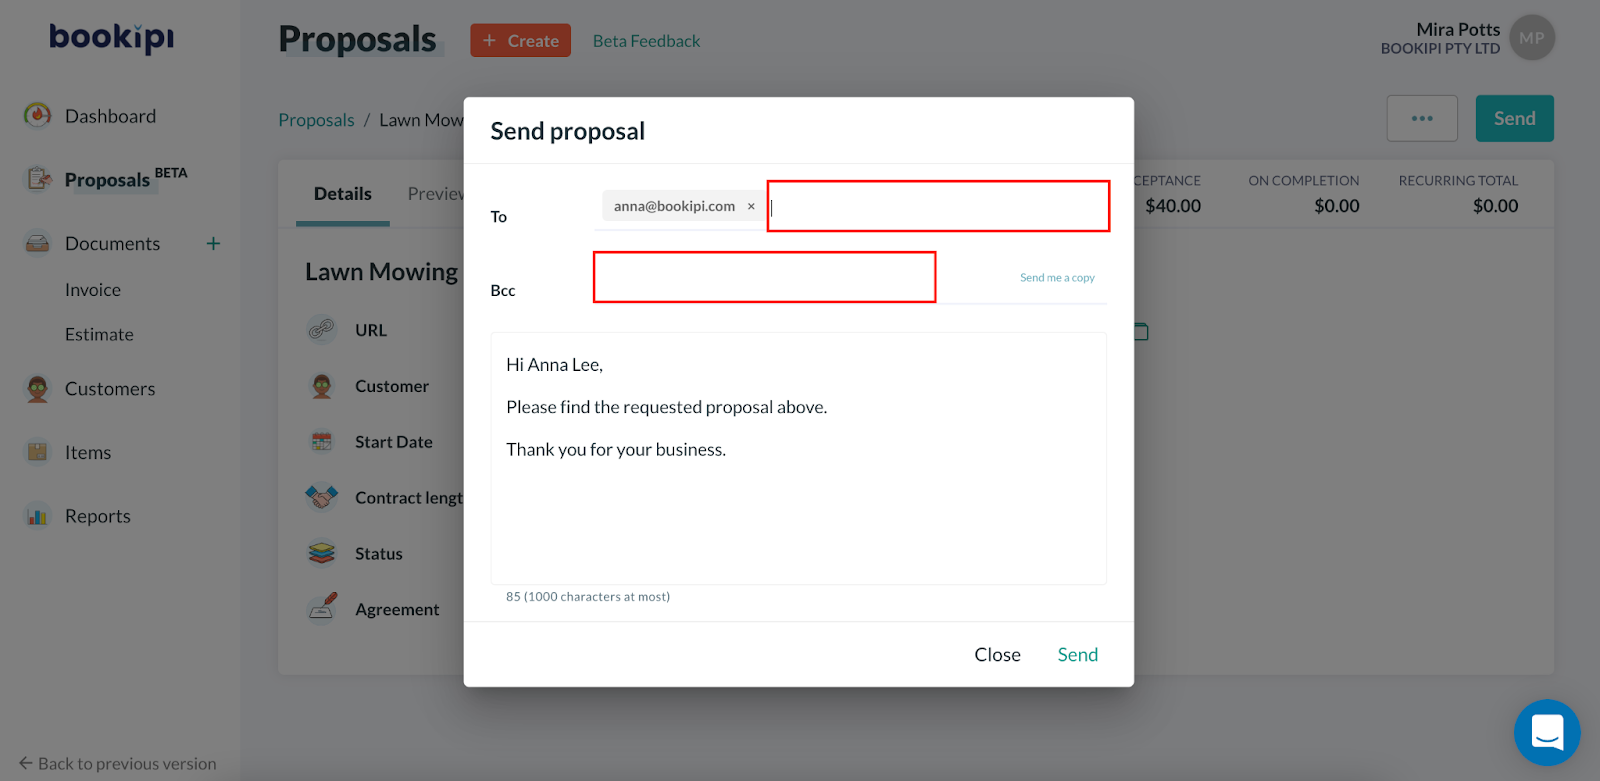 Proposals - How to send a proposal to multiple people - 4